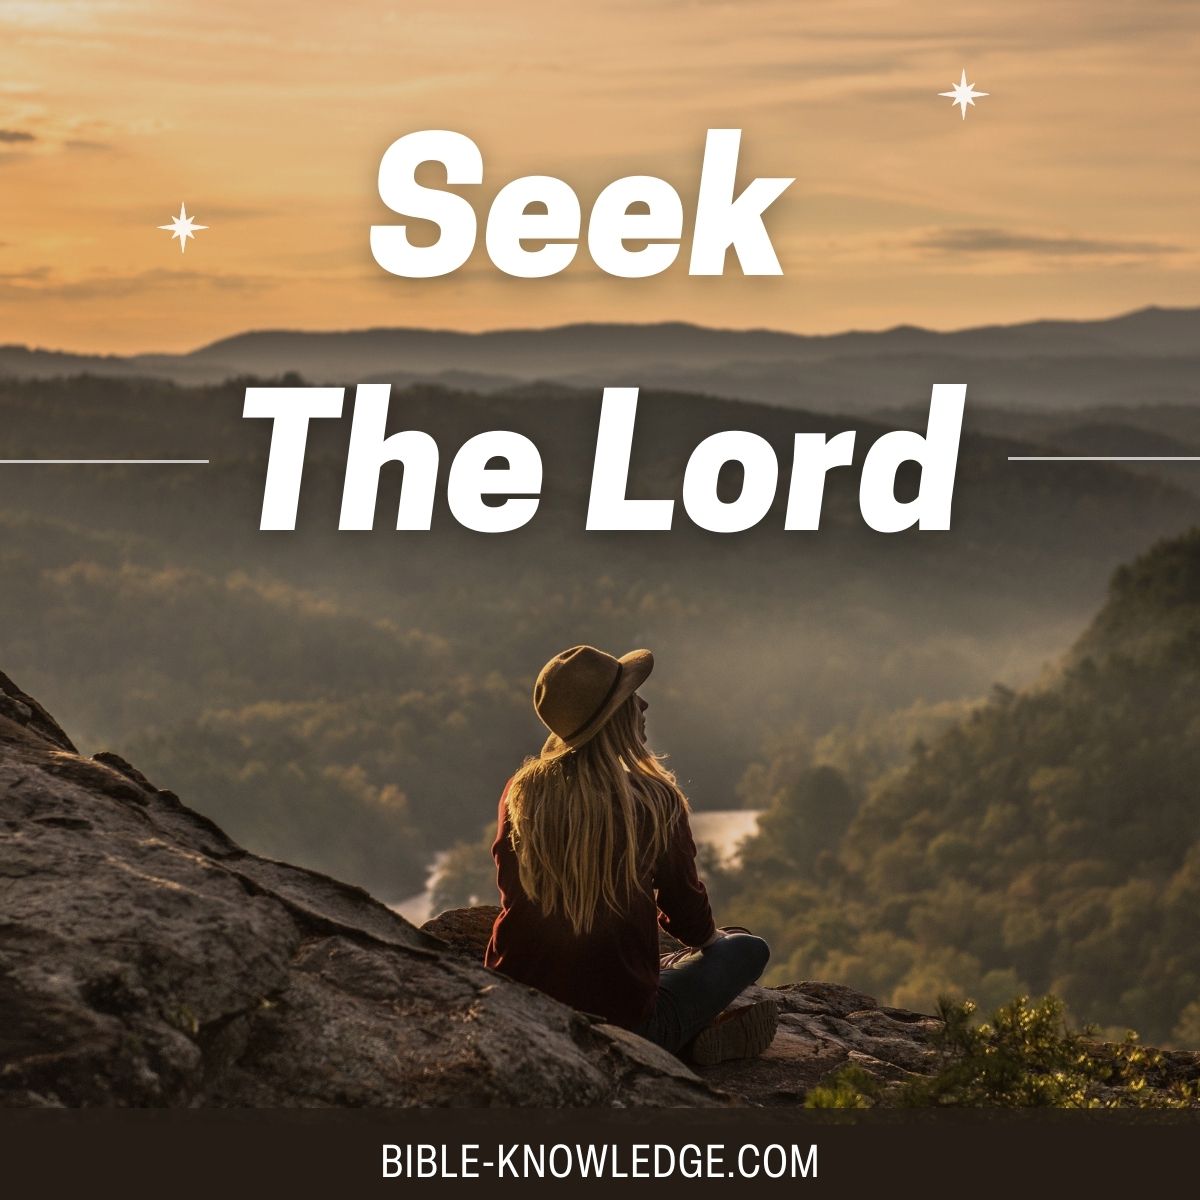 Seek The Lord - With All of Your Heart and Soul